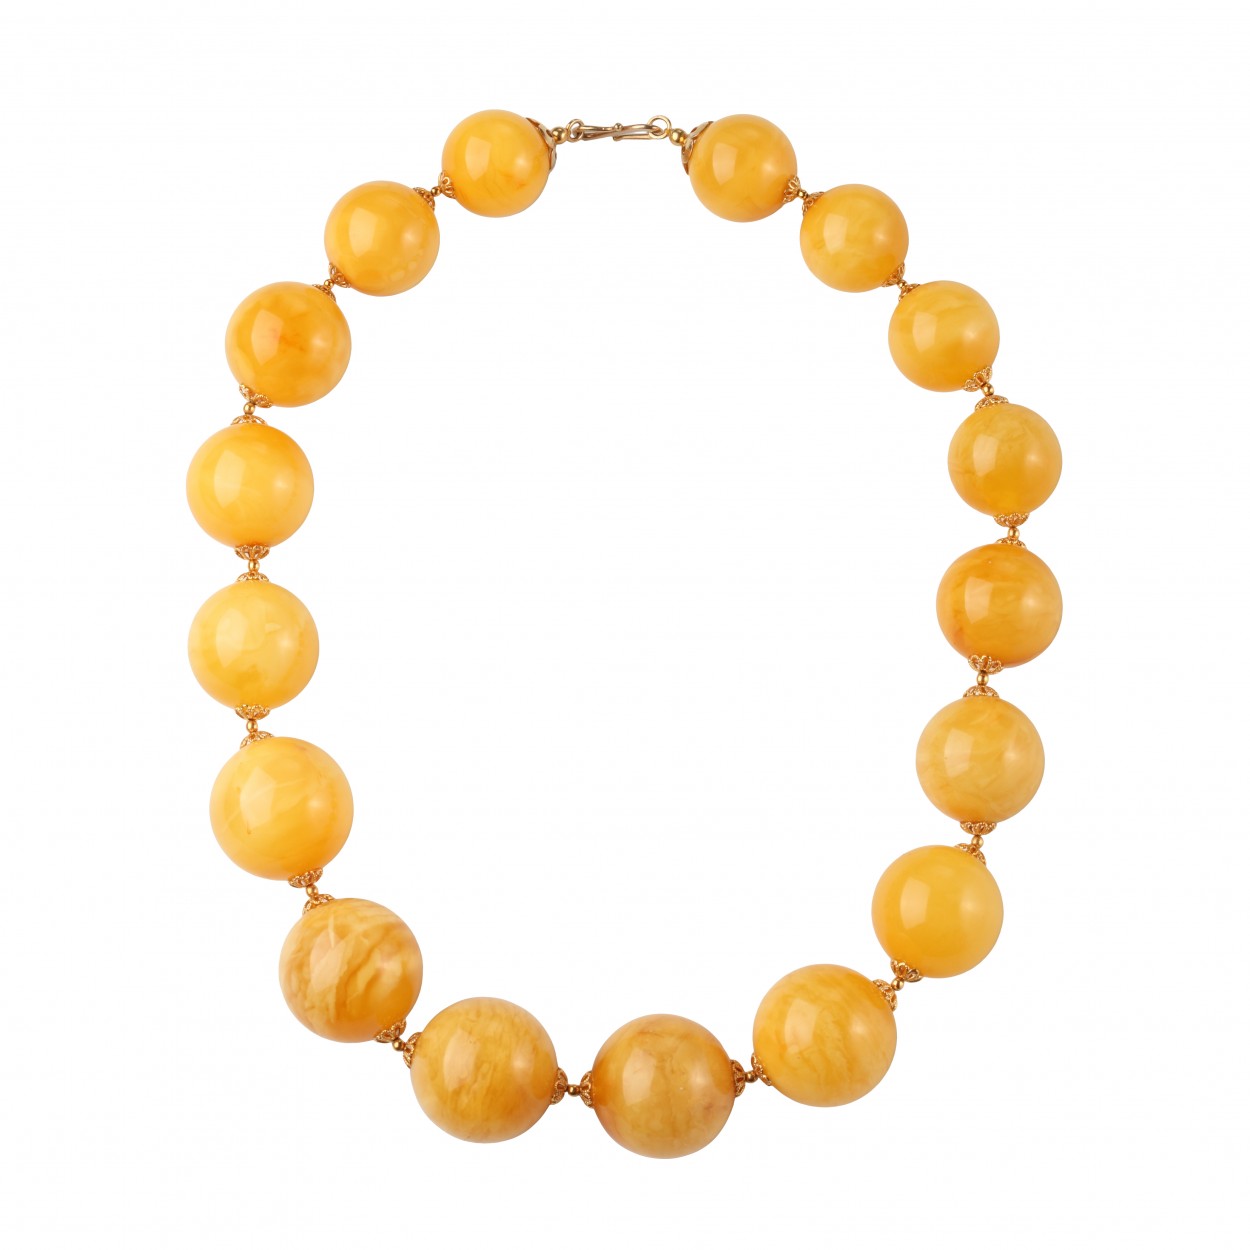  Royal Beads Amber Necklace